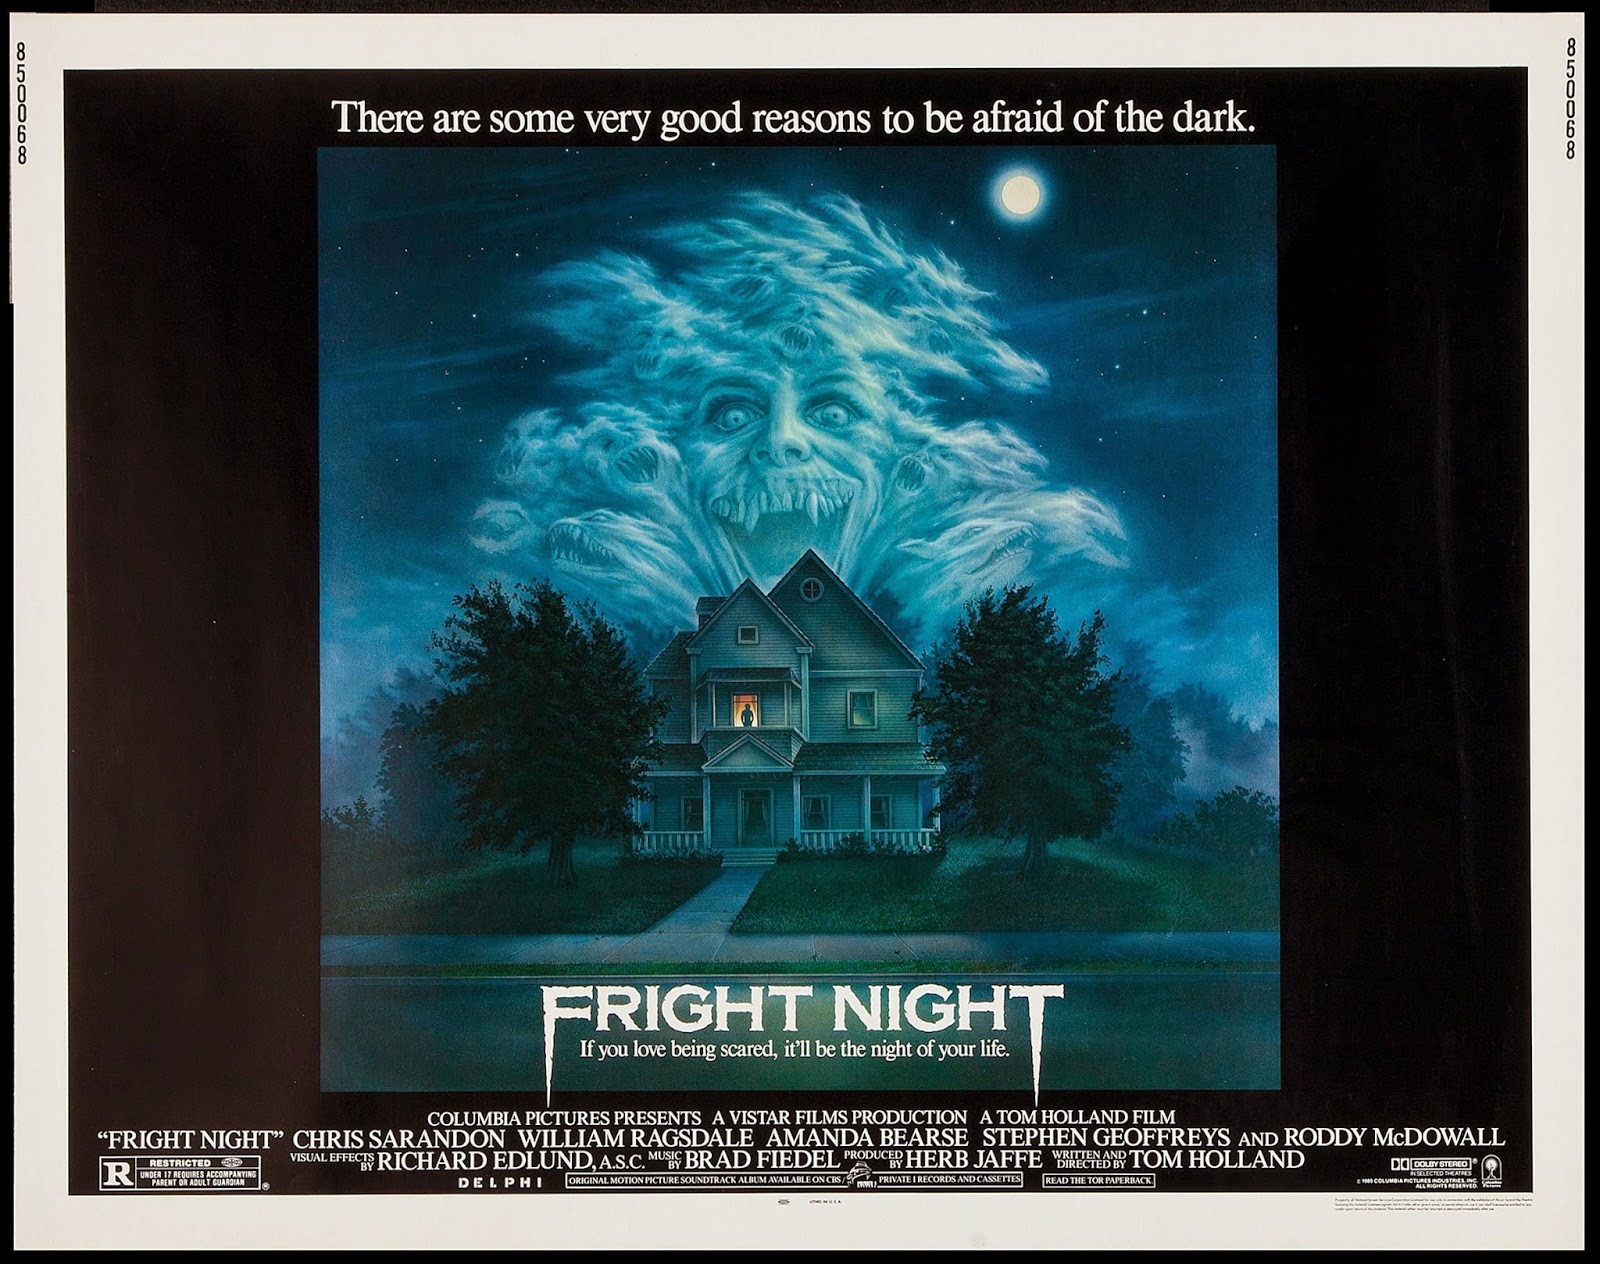 FRIGHT NIGHT (New & Exclusive) HD Trailer - YouTube